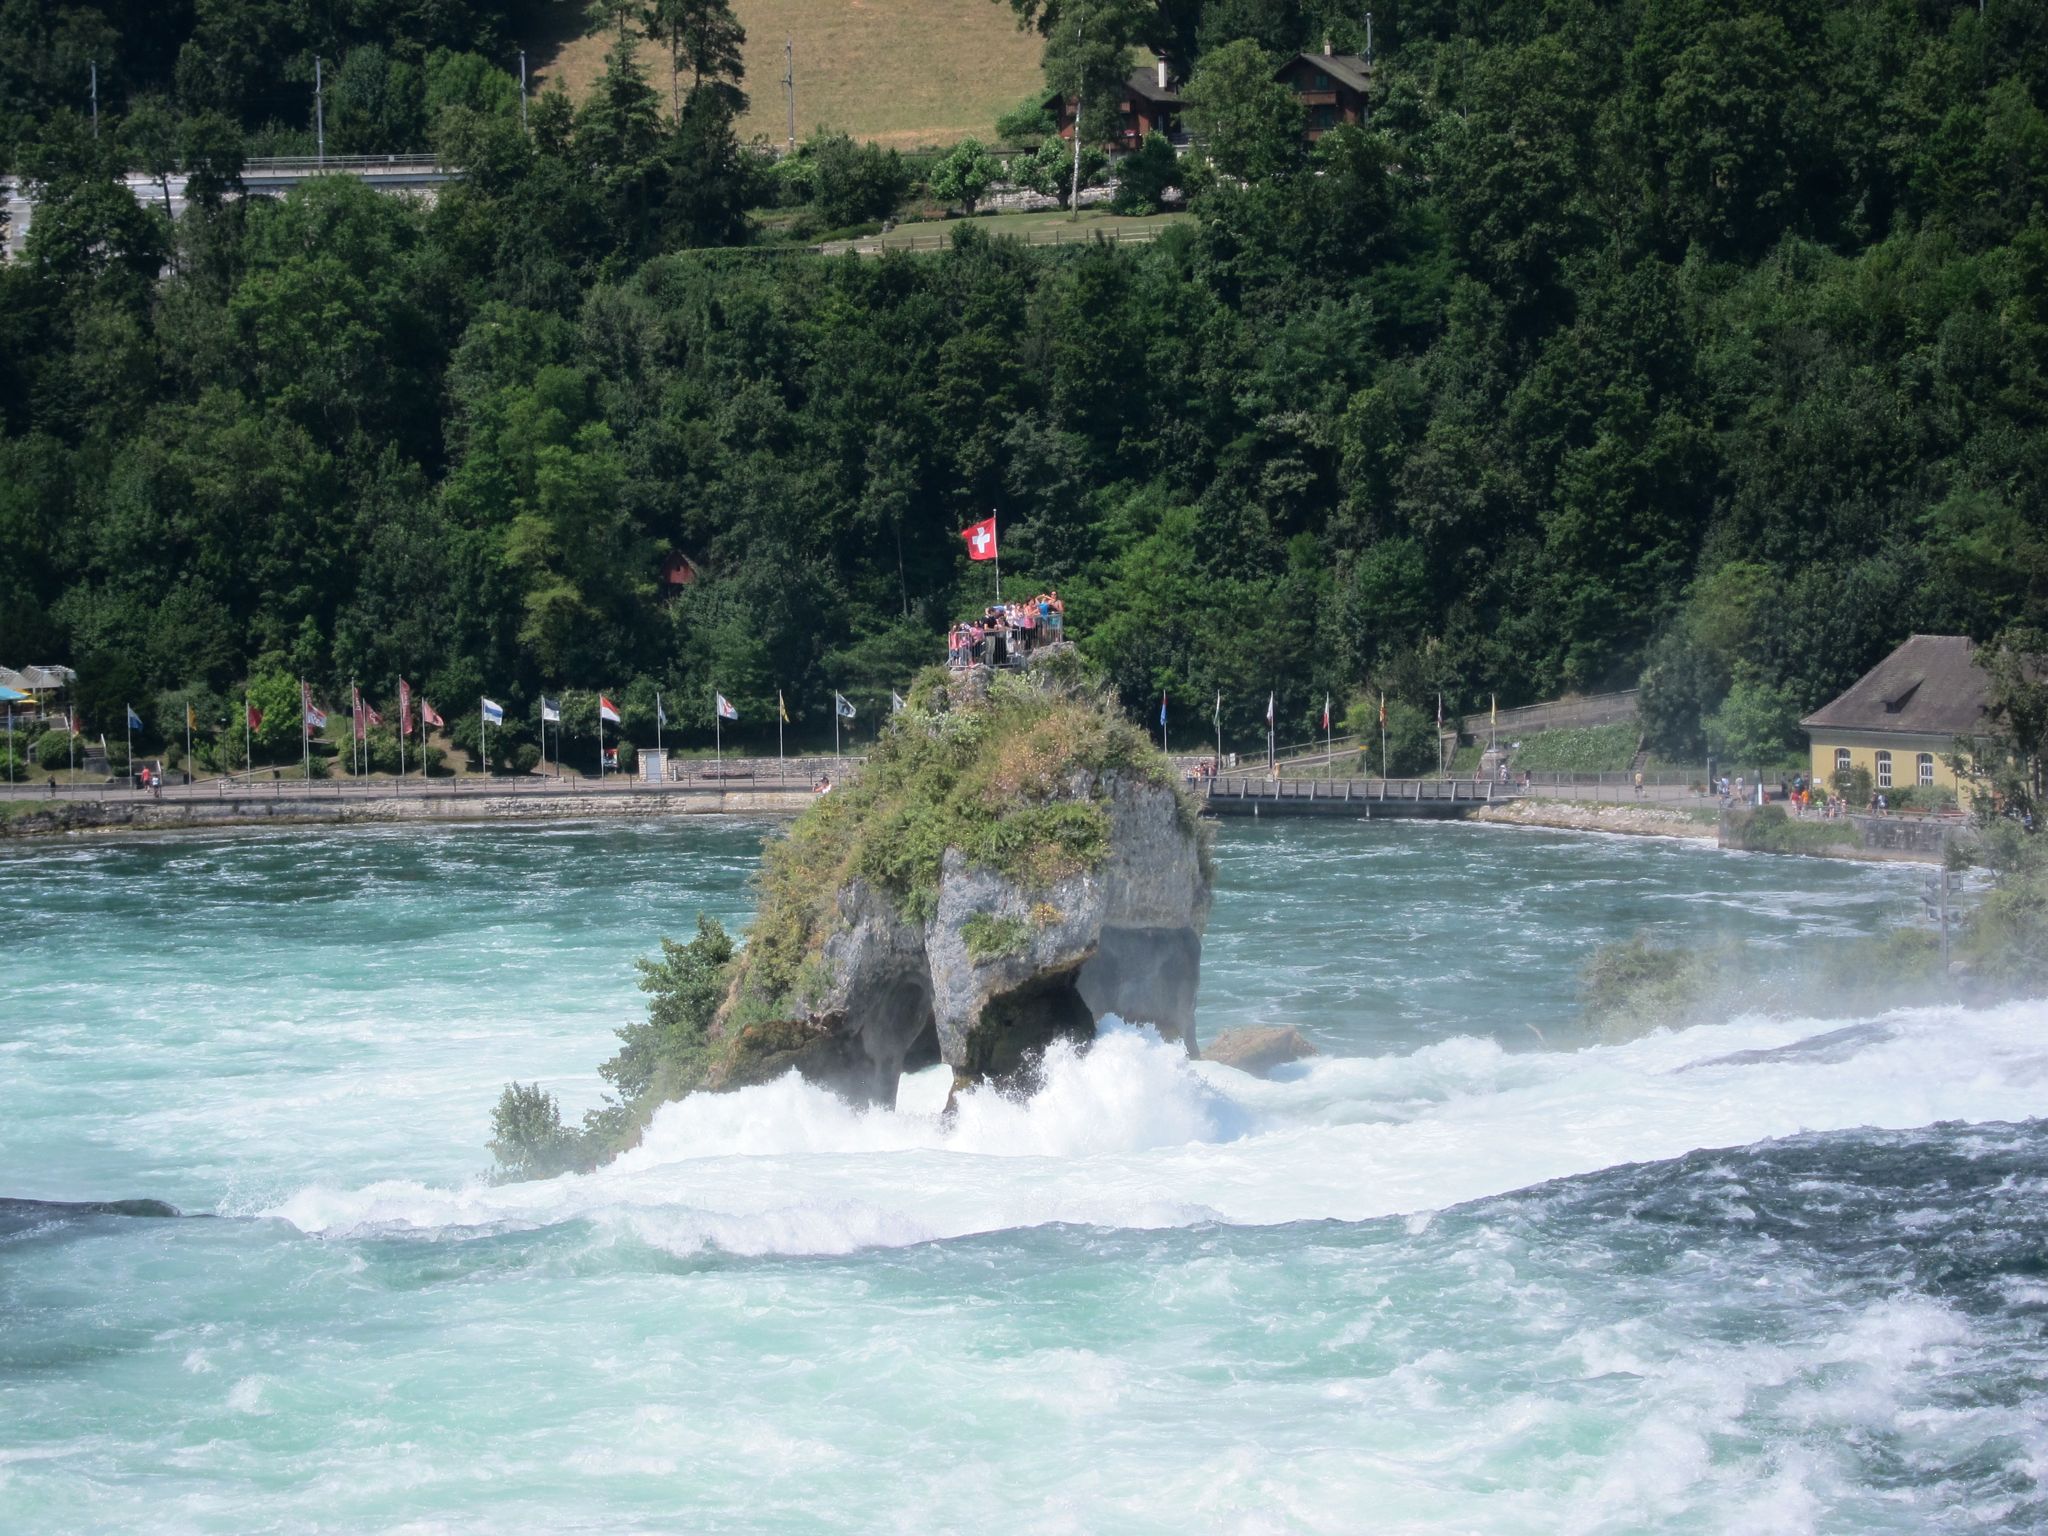 Photo 16 of 22 from the album Rheinfall.